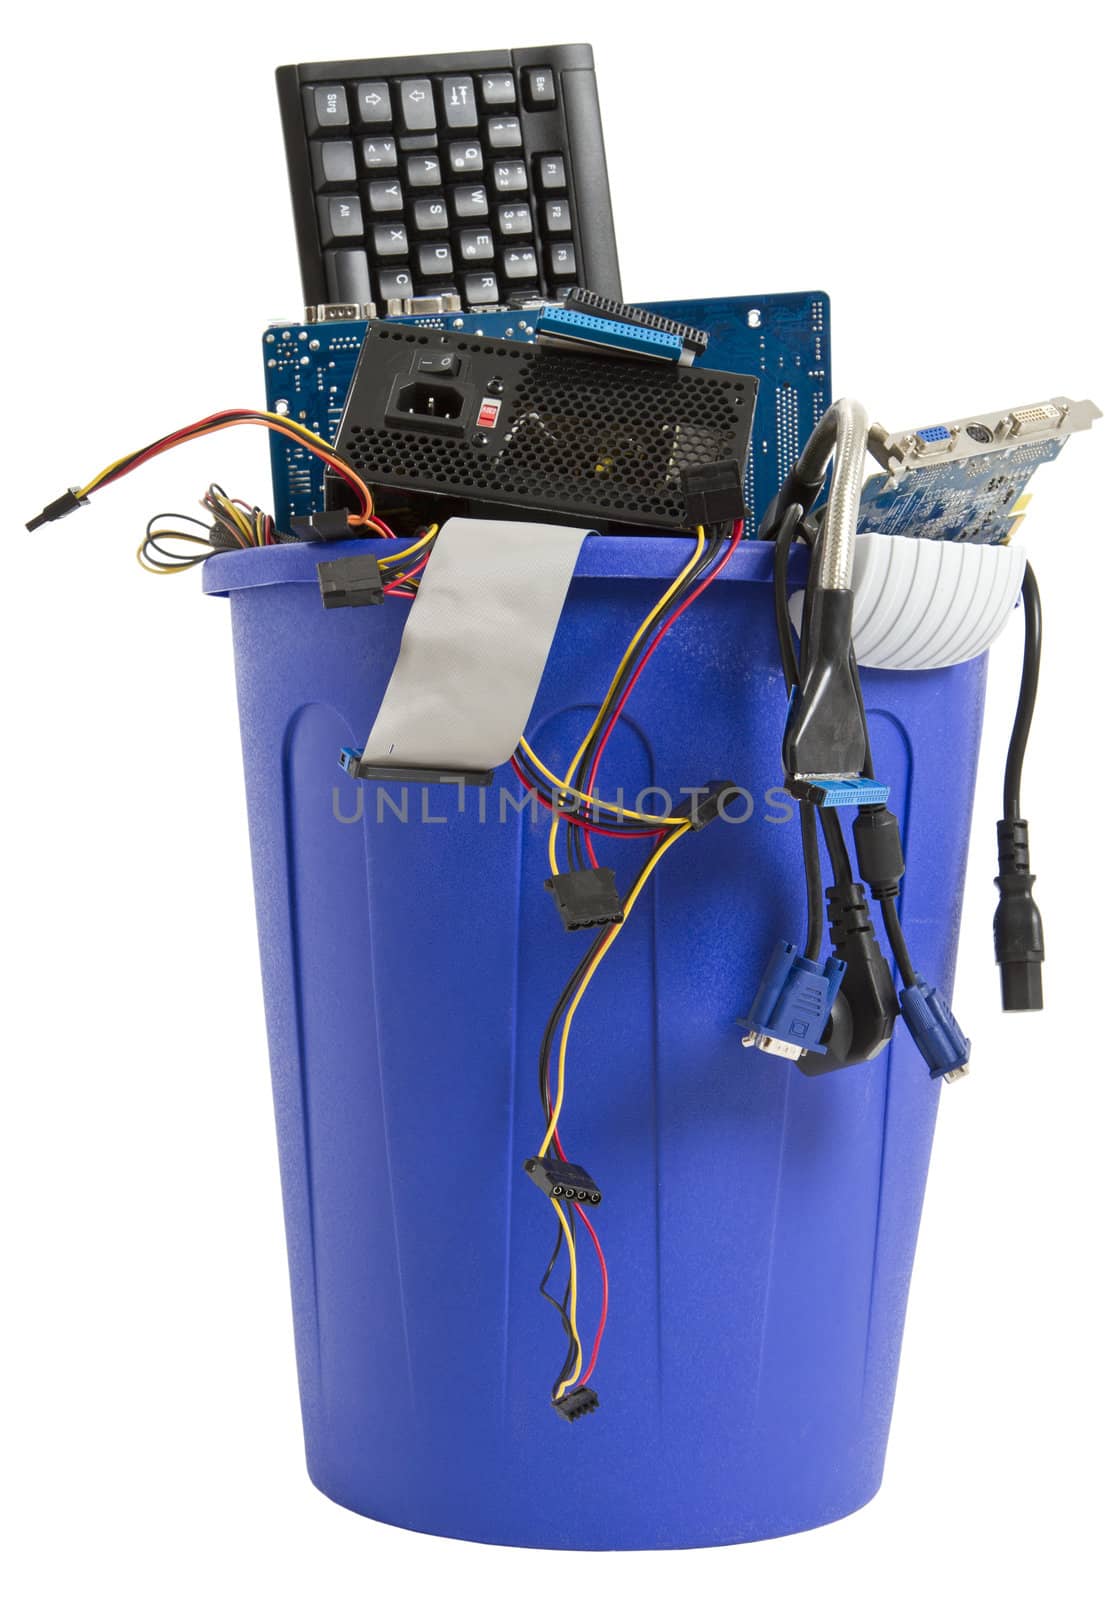 electronic scrap in trash can. keyboard, power supply, cables, logicboard - isolated on white background